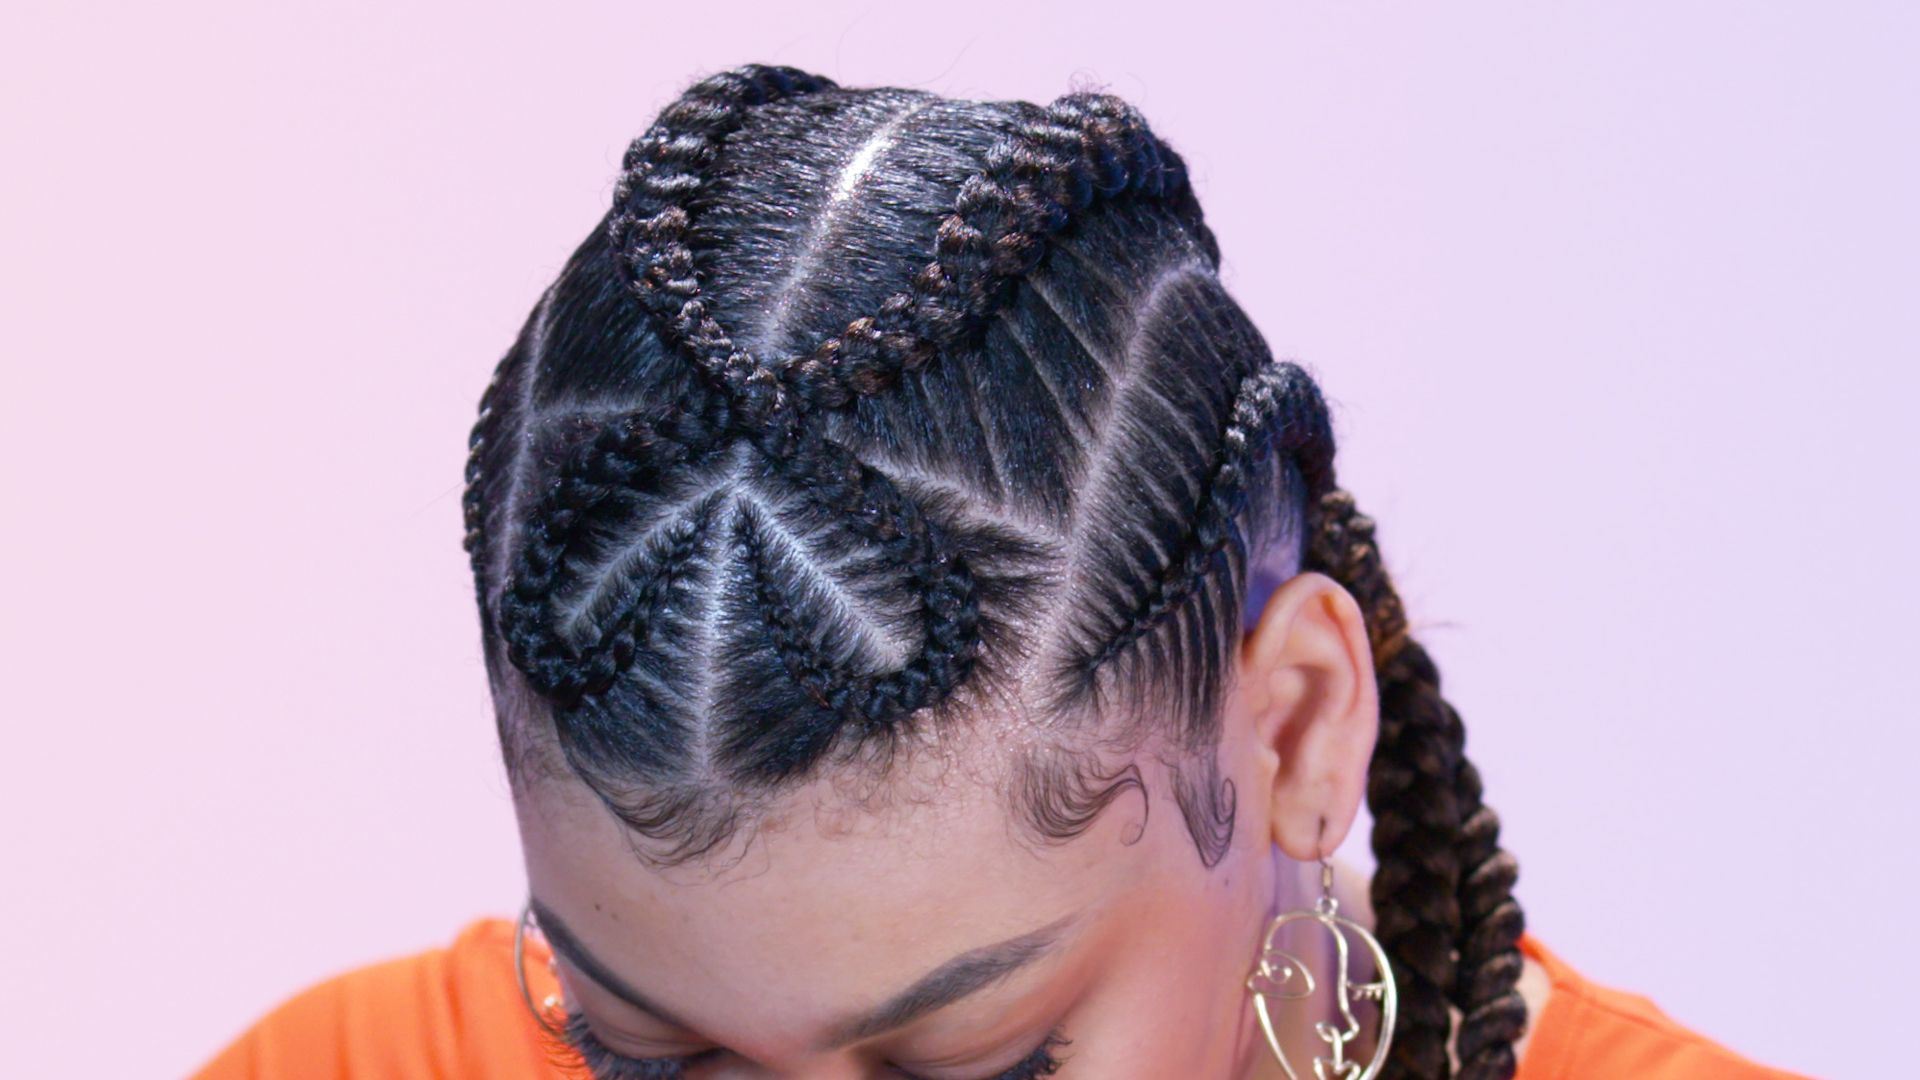 40 Criss Cross Braids Hairstyles You Need to Try